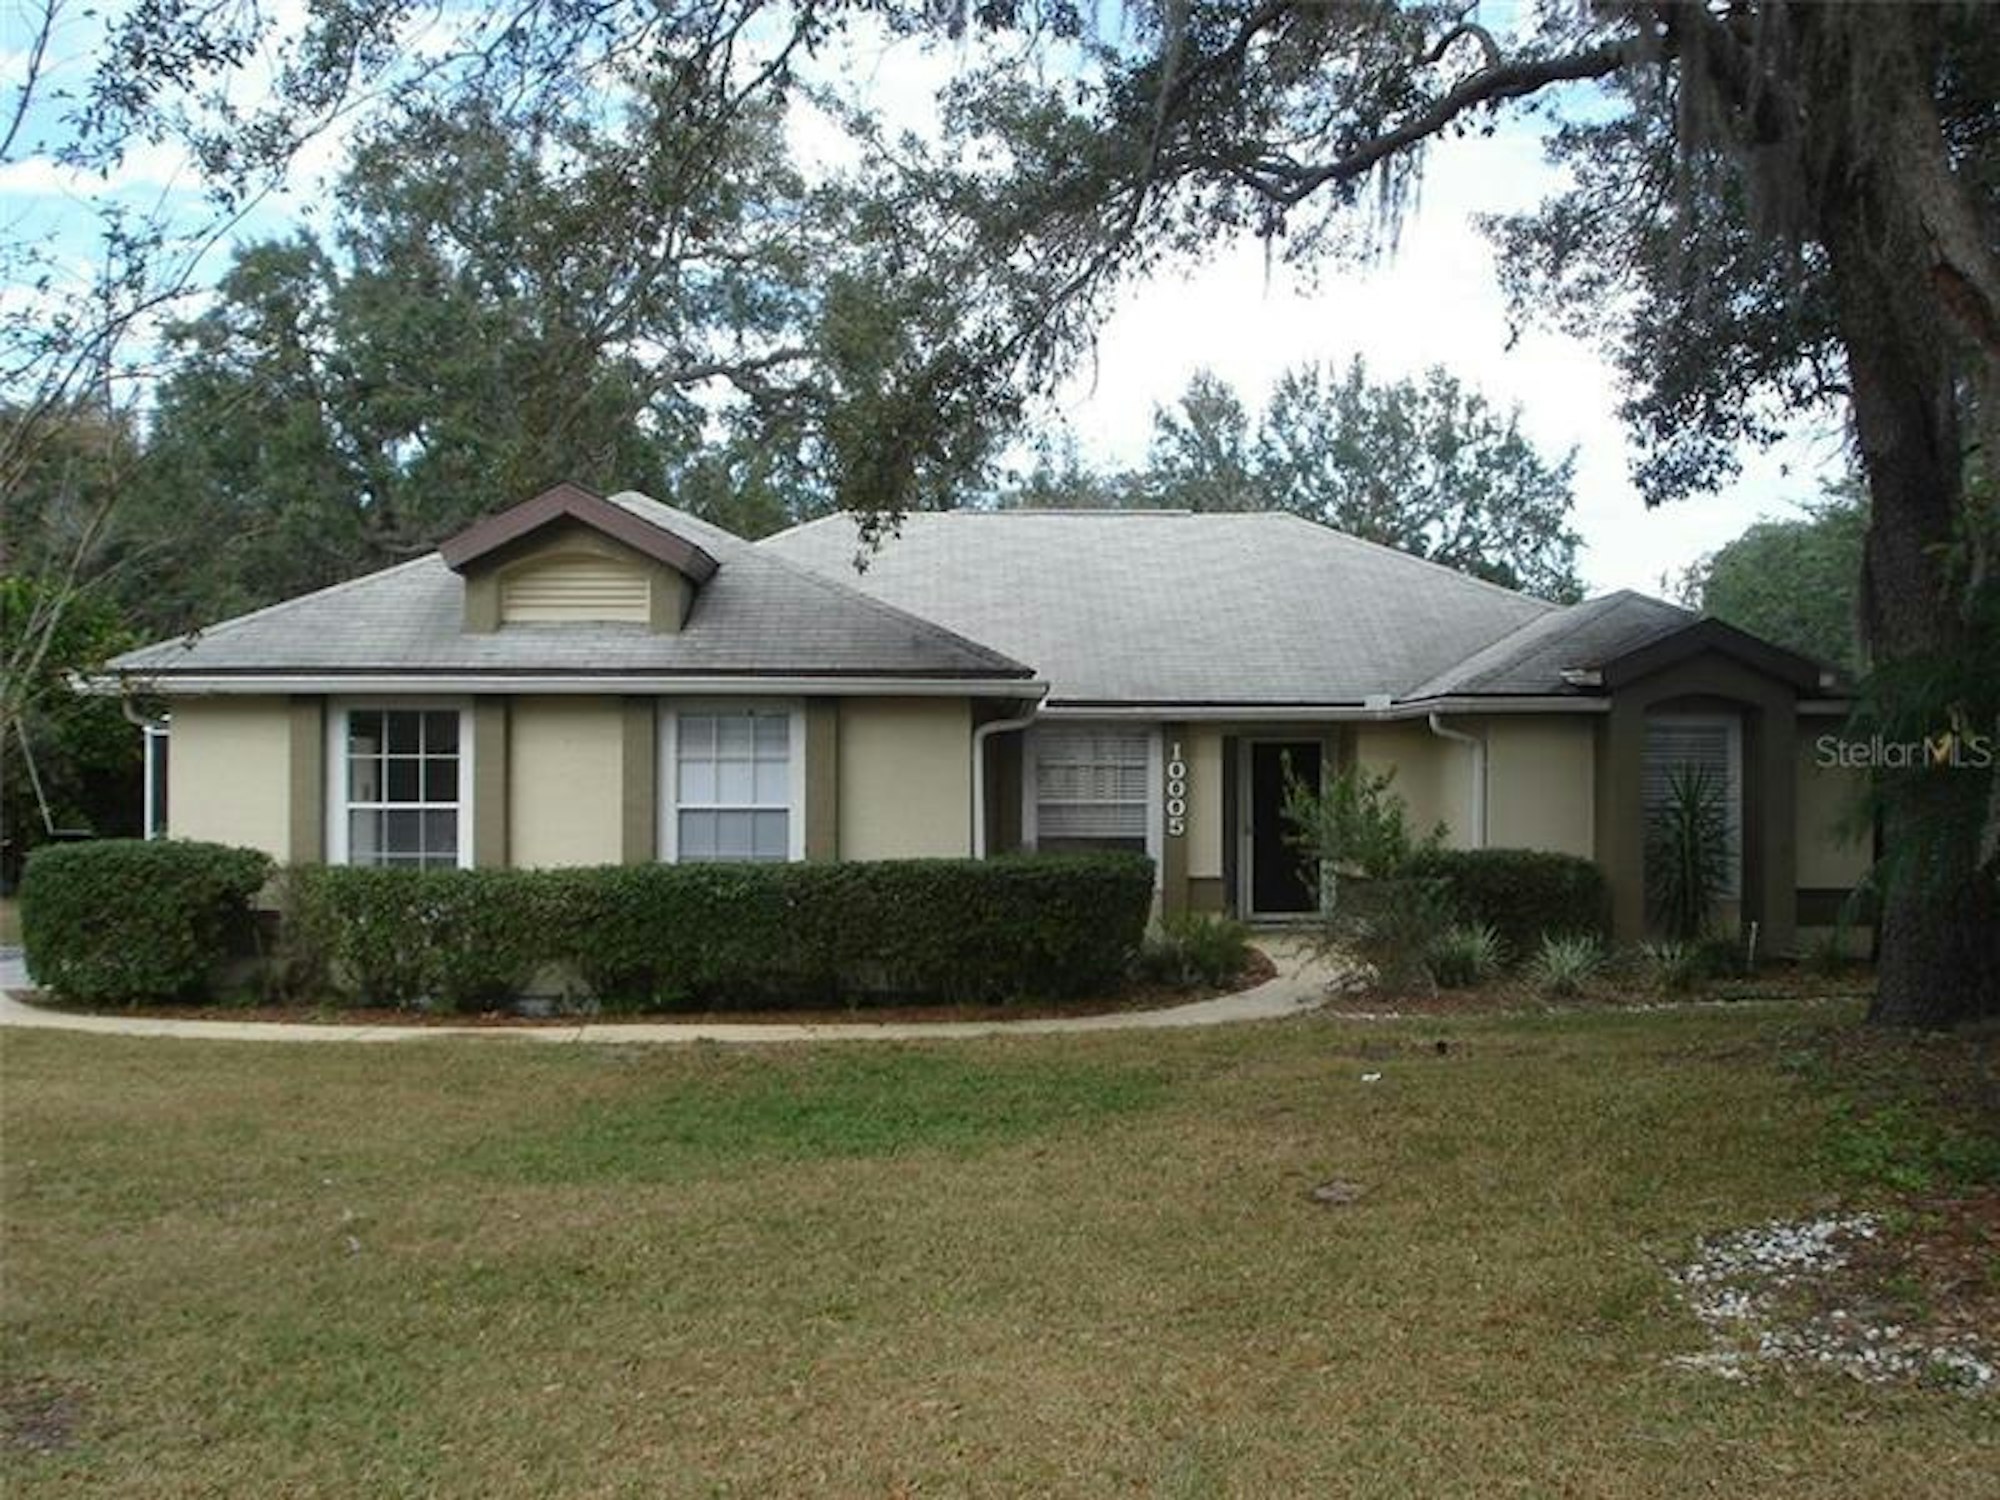 Photo 1 of 1 - 10005 Silver Bluff Dr, Leesburg, FL 34788